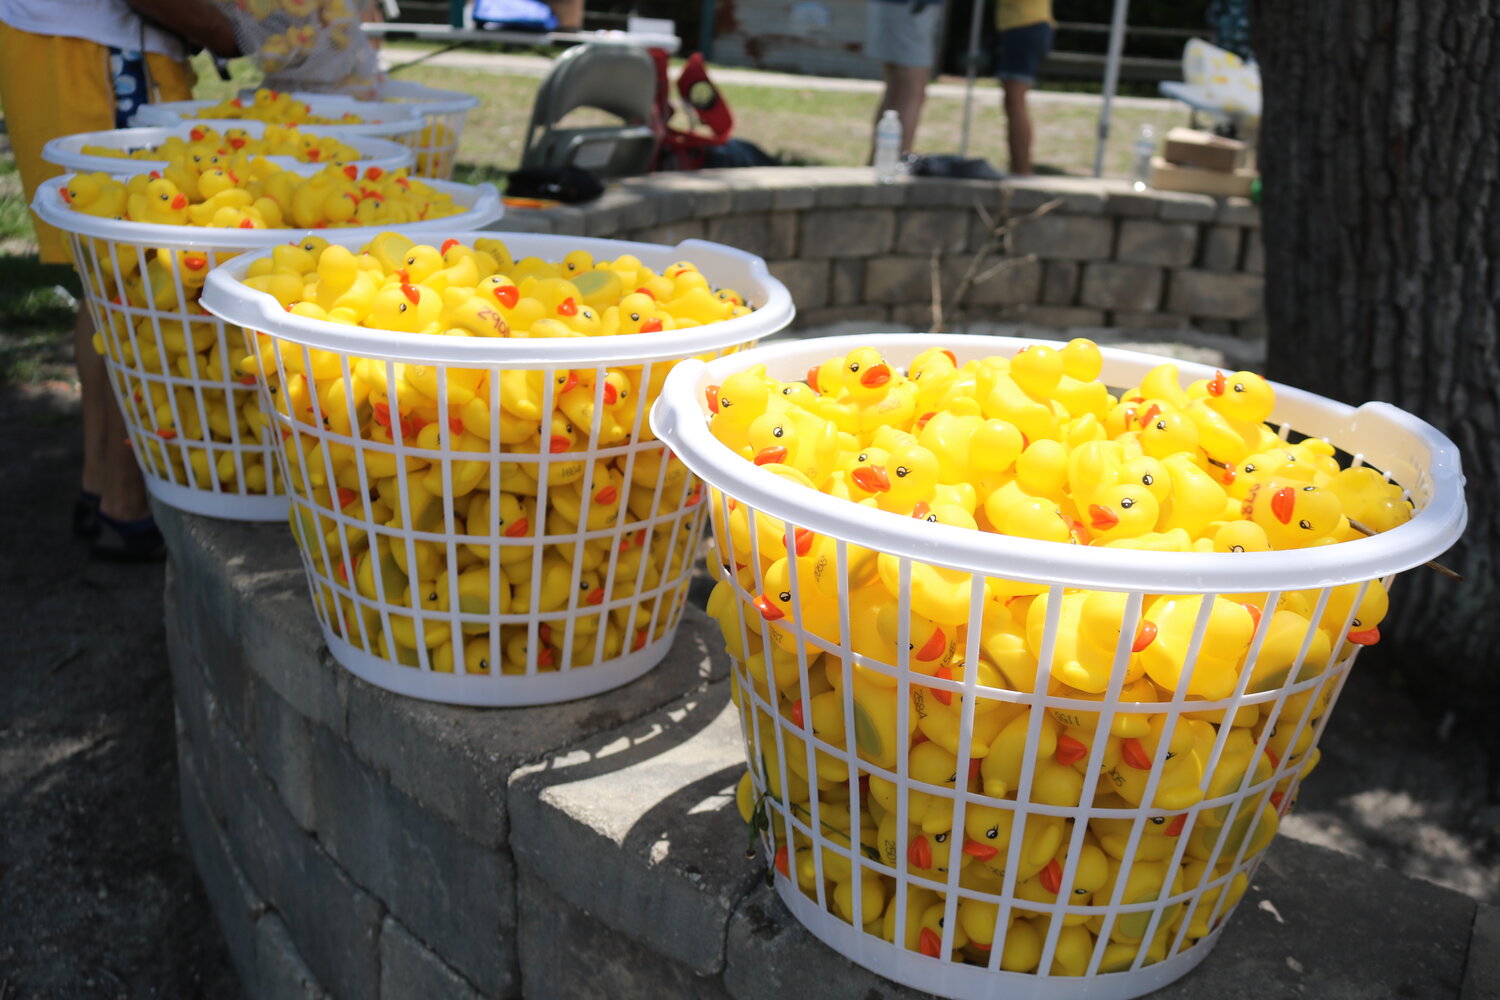 Three thousand rubber ducks took part in the race.